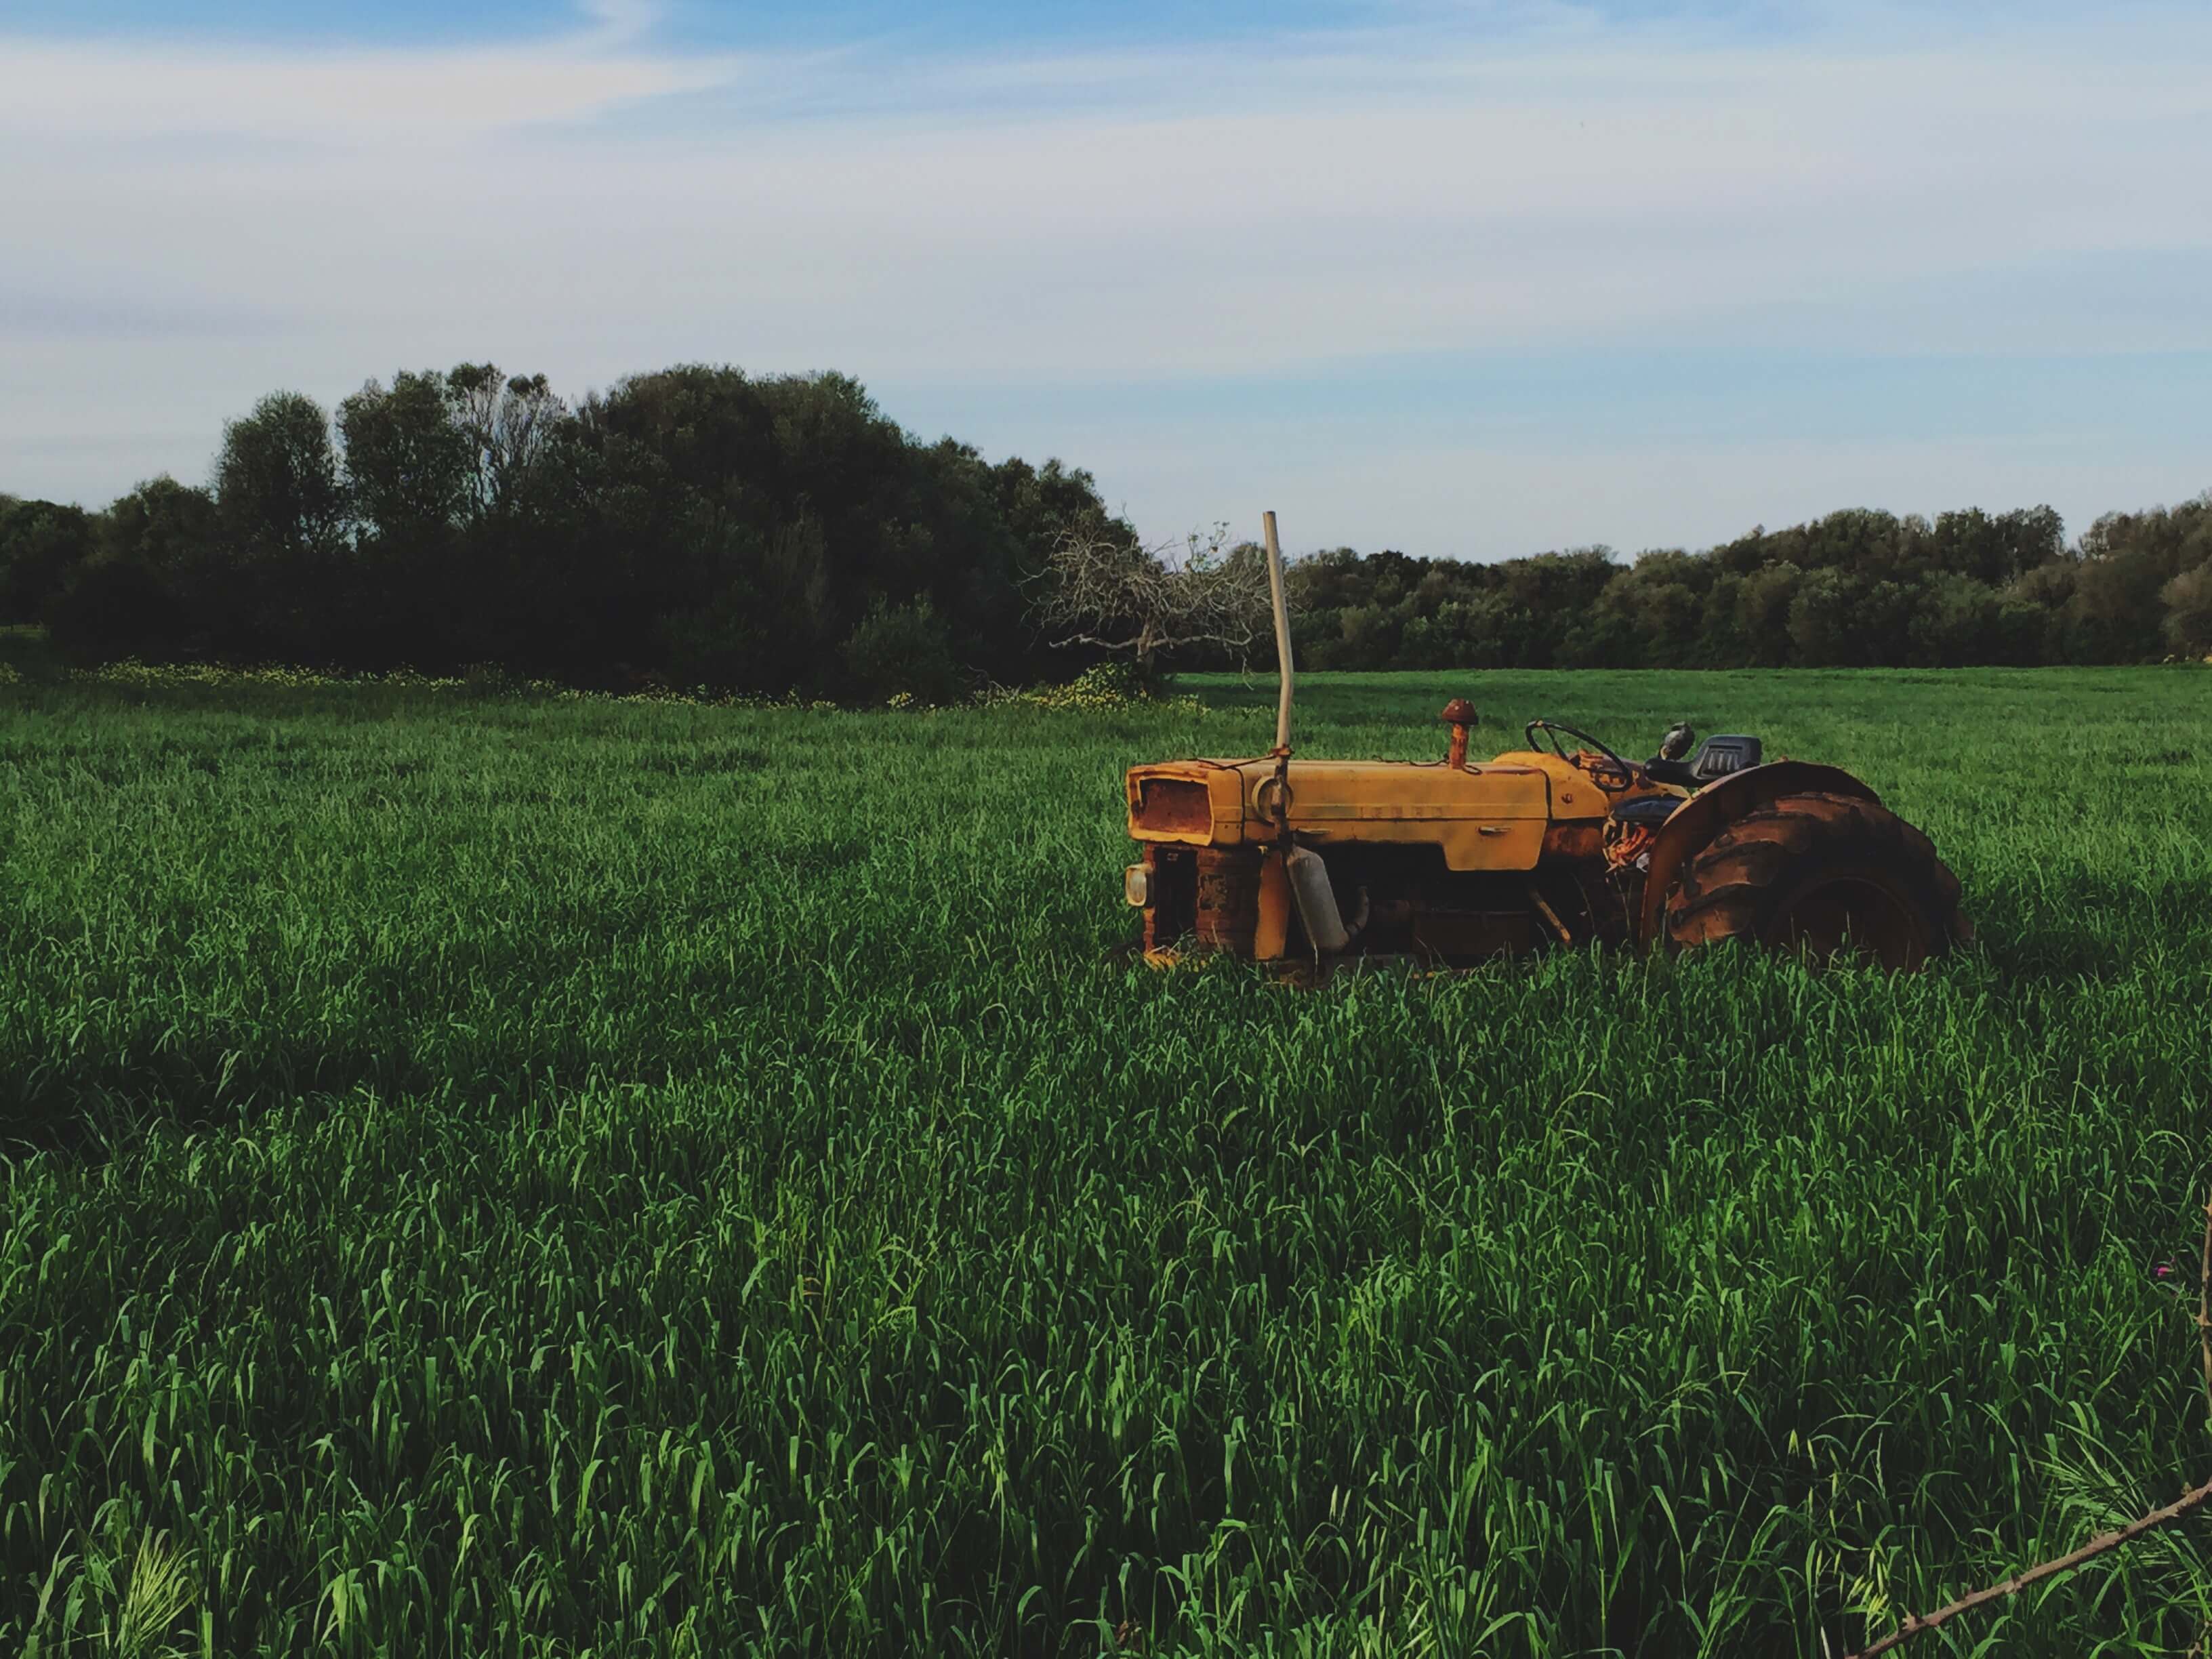 A yellow tractor in a lush green field of crops